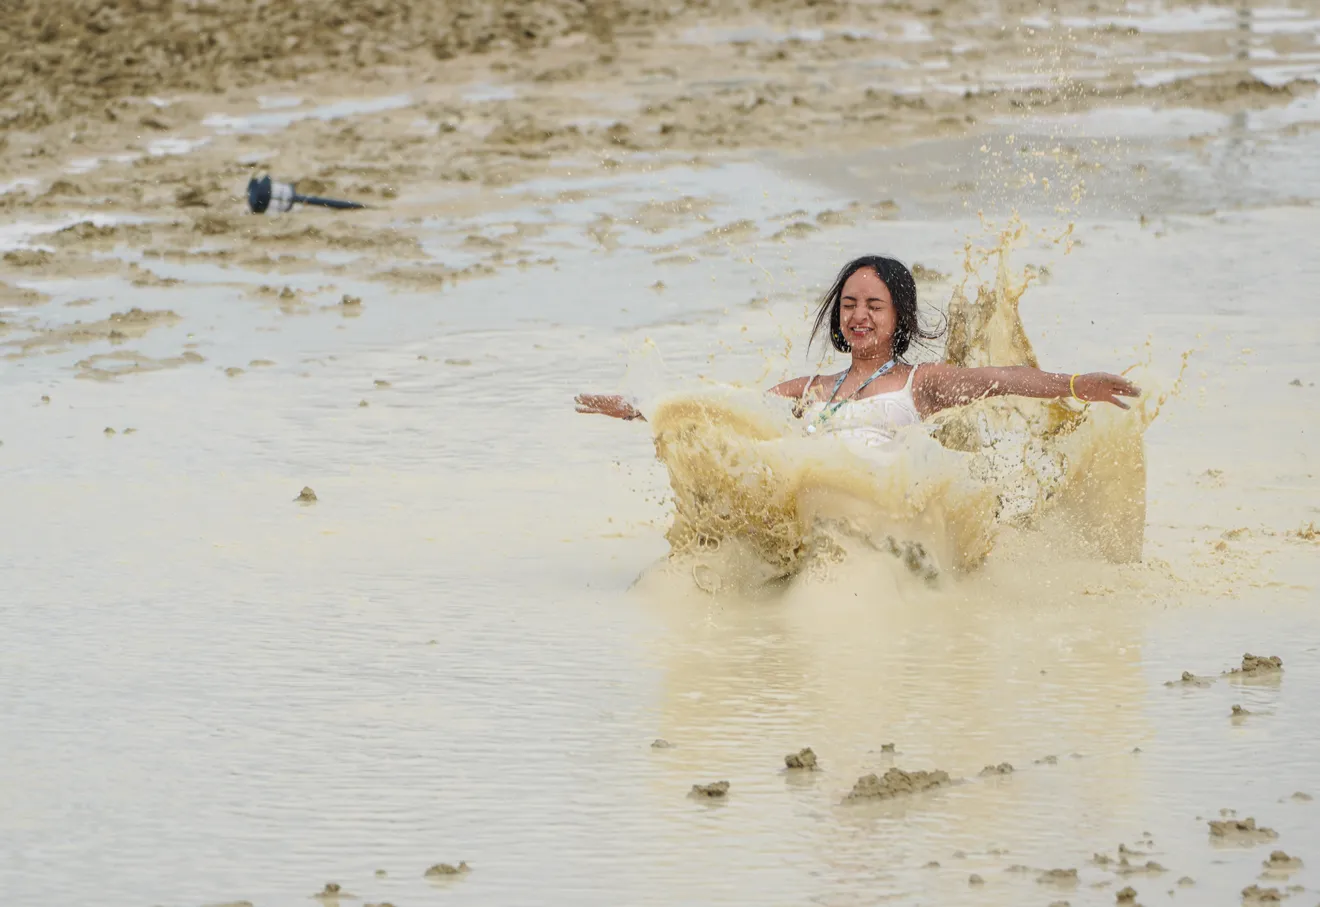 Shai Peza of Chicago frolics in the mud and water at the flooded Burning Man festival on 2 September 2023, after a rainstorm flooded the site and stranded thousands. Photo: Trevor Hughes / USA TODAY